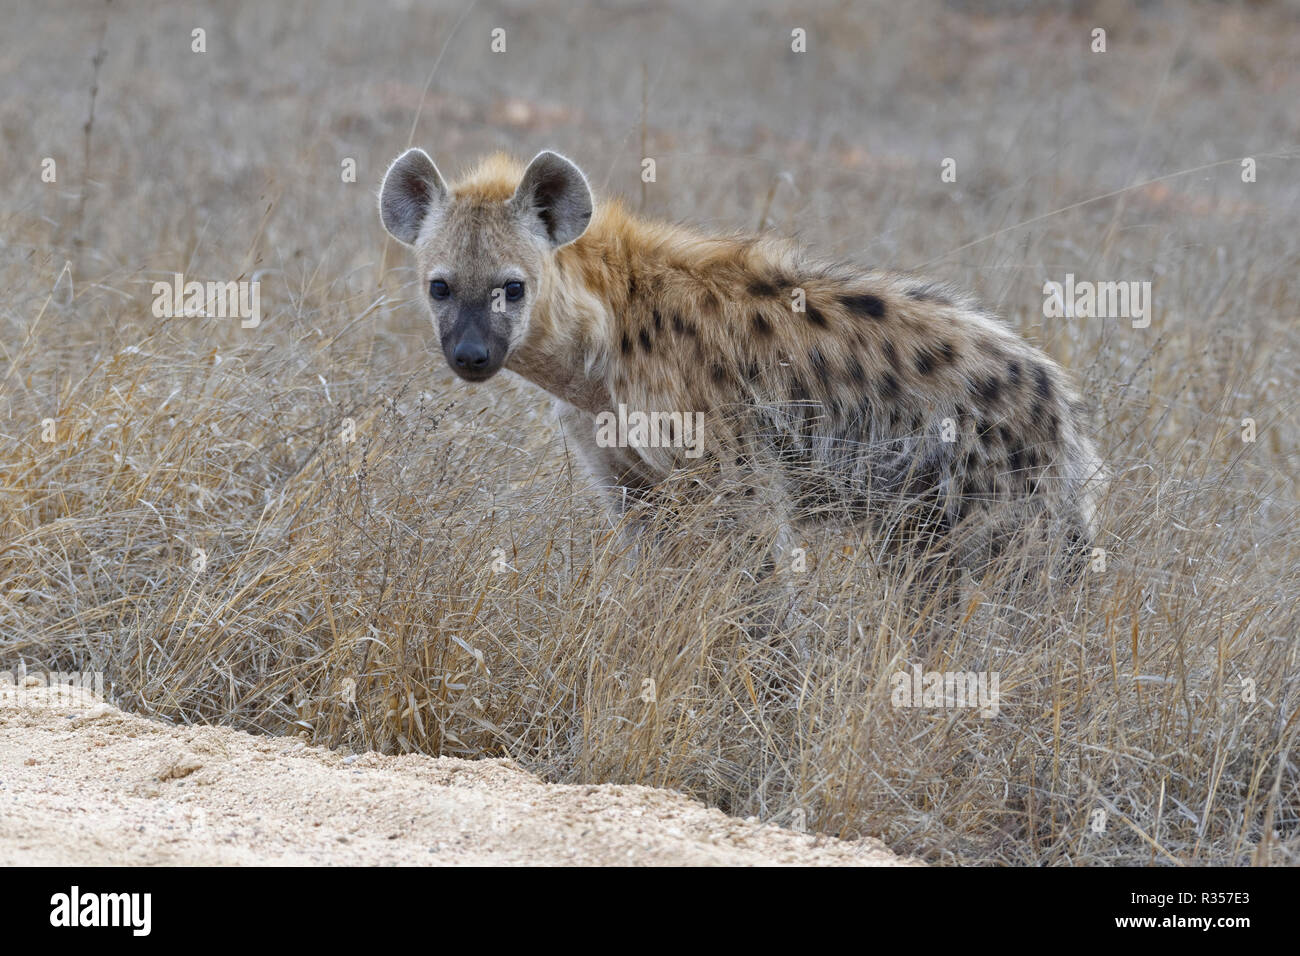 Spotted hyena or Laughing hyena (Crocuta crocuta), cub, standing on the edge of a dirt road, Kruger National Park, South Africa, Africa Stock Photo